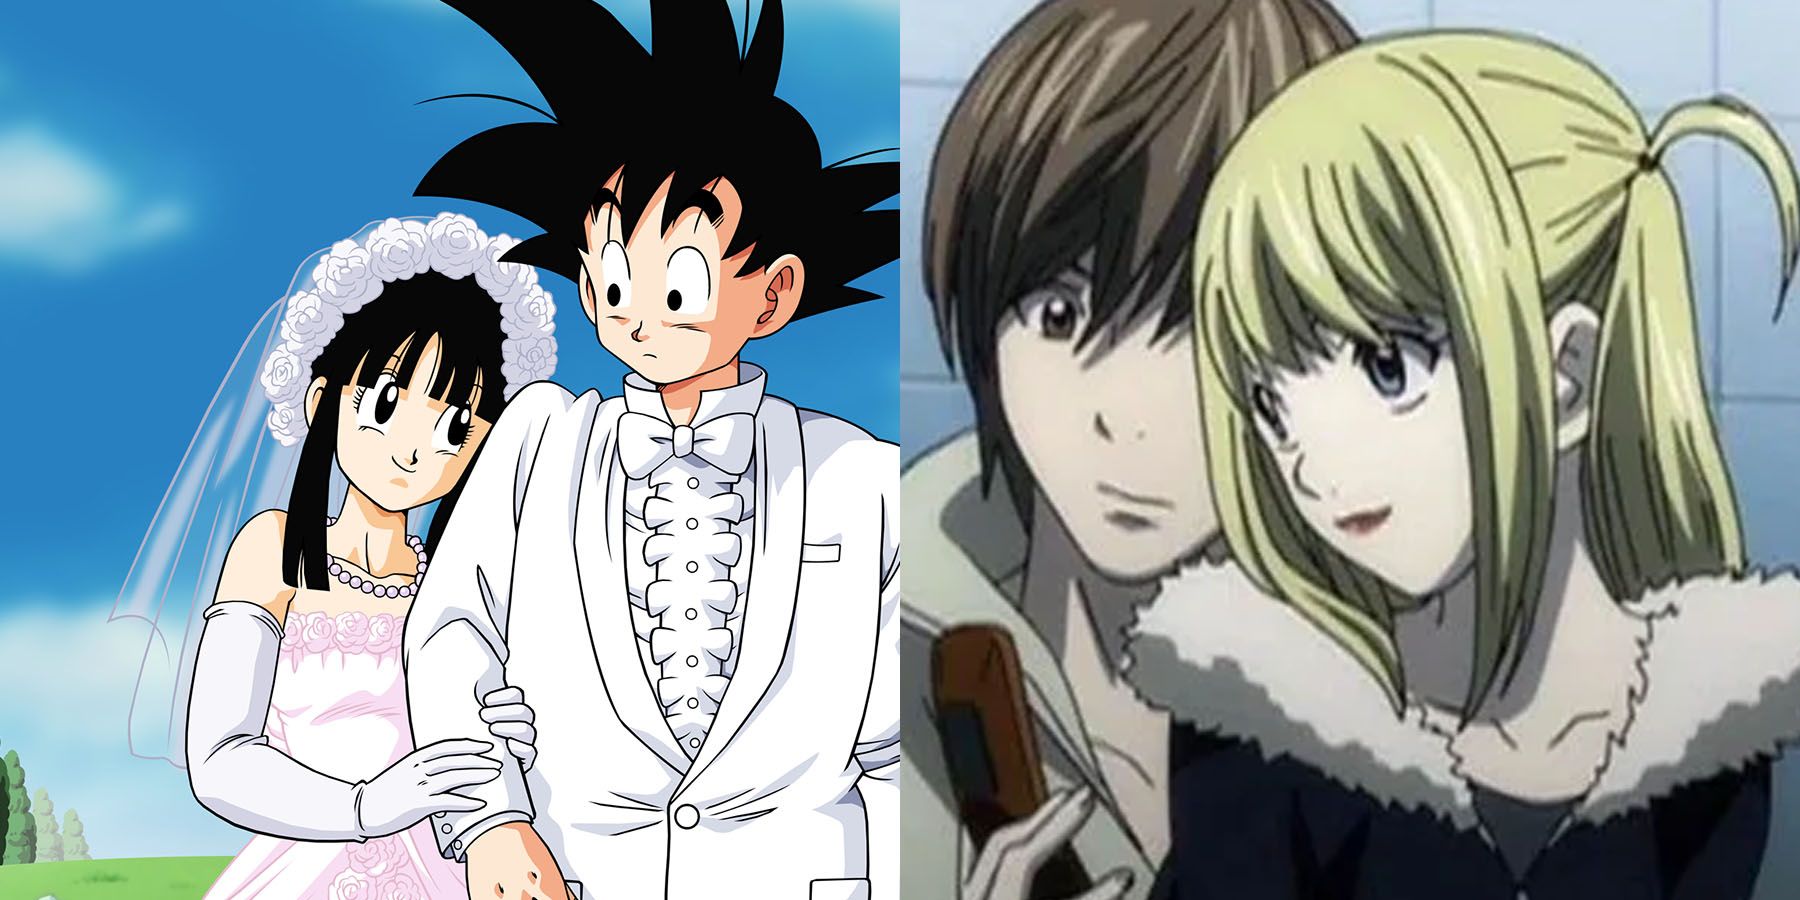 15 Controversial Anime Moments Fans Had A Visceral Reaction To - Ranker